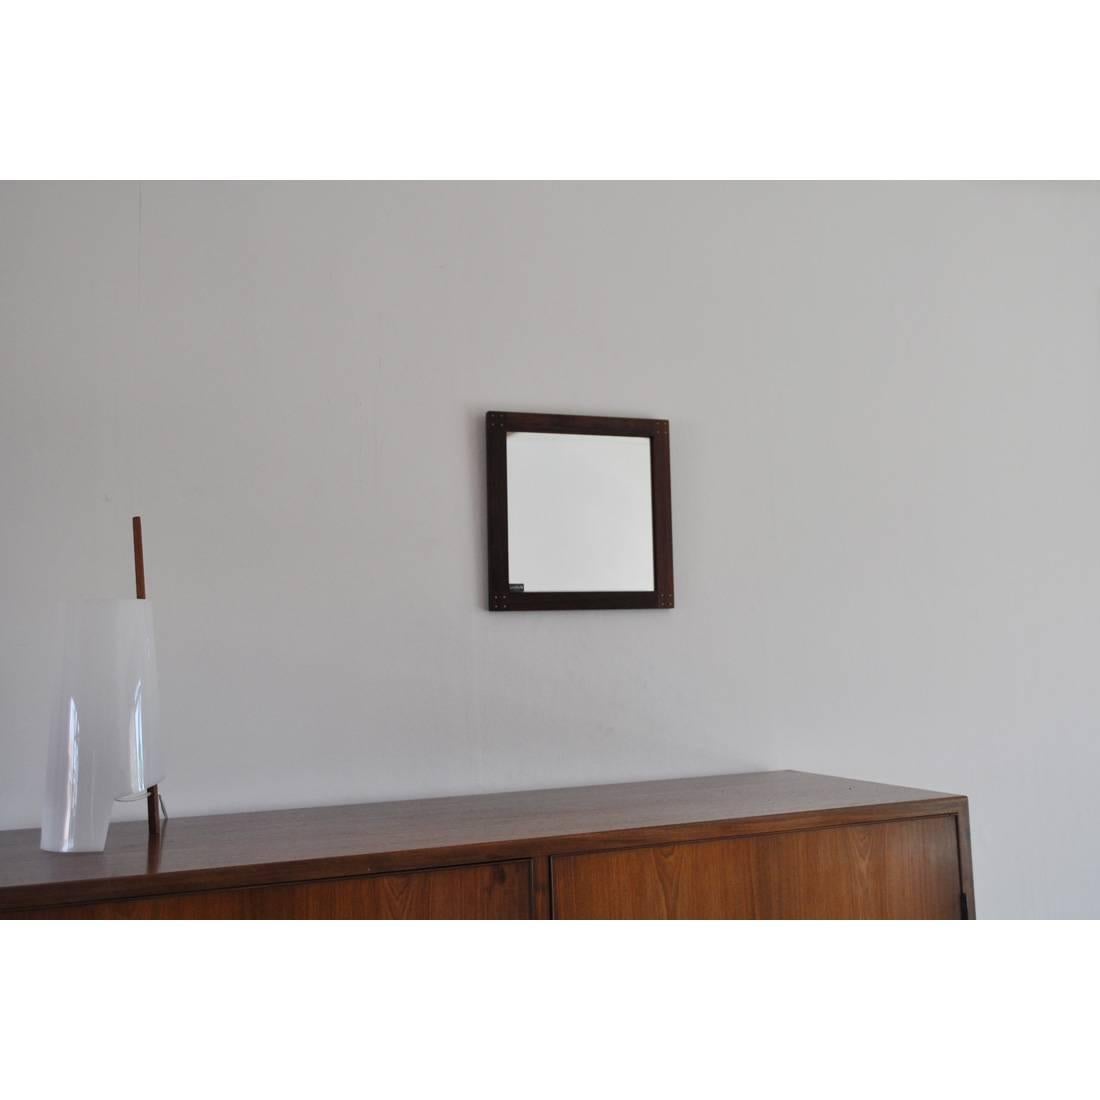 Rare Swedish rosewood mirror with silver detail by Uno & Östen Kristiansson. Produced by Luxus in Vittsjö, 1960s.
 